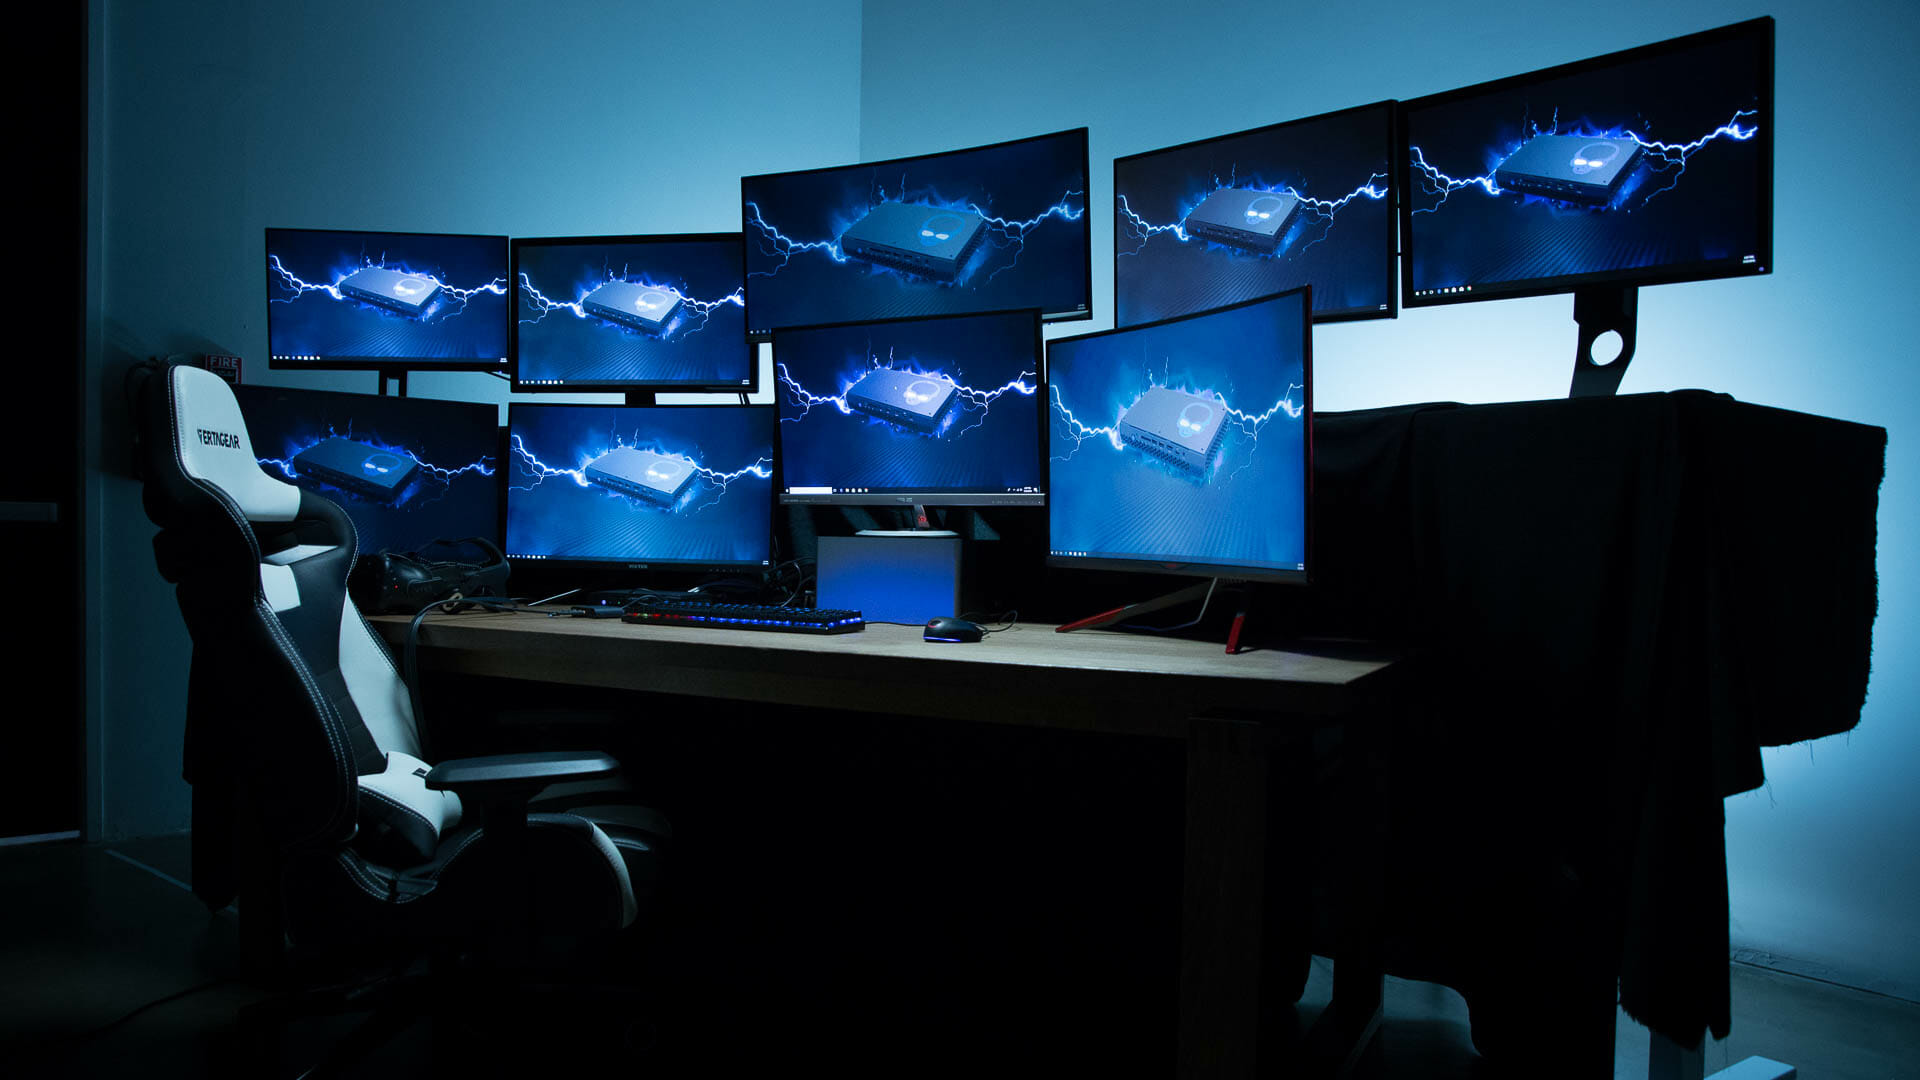 Many monitors on a table in a dark room